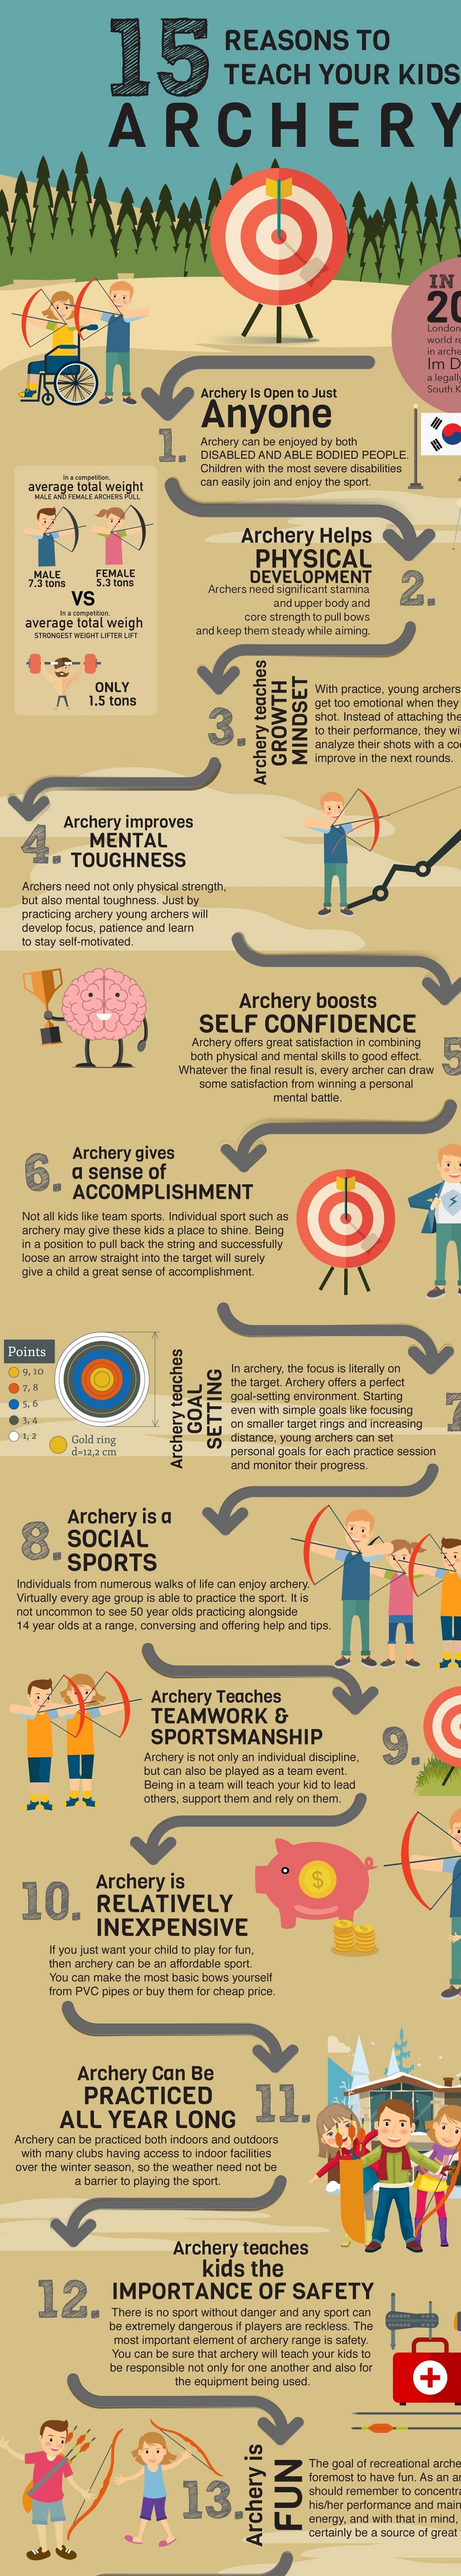 15 reasons to teach your kids archery